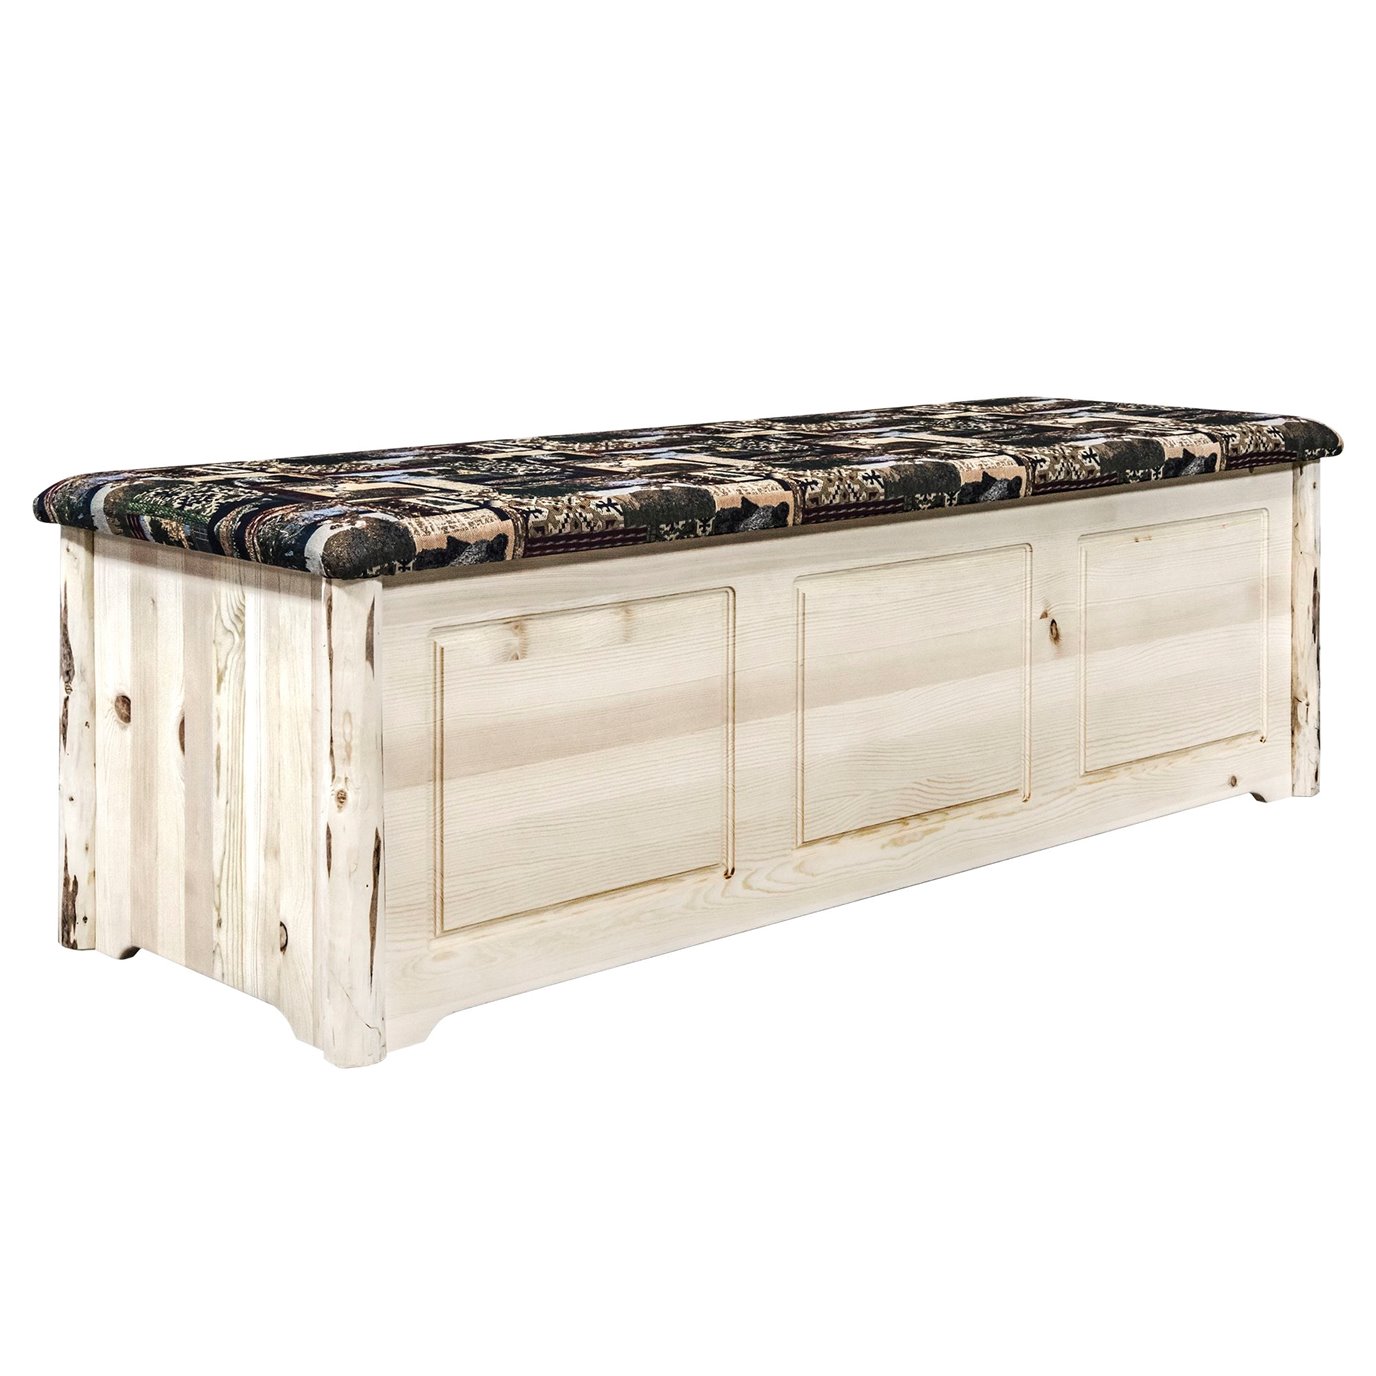 Montana Blanket Chest w/ Woodland Upholstery - Clear Lacquer Finish